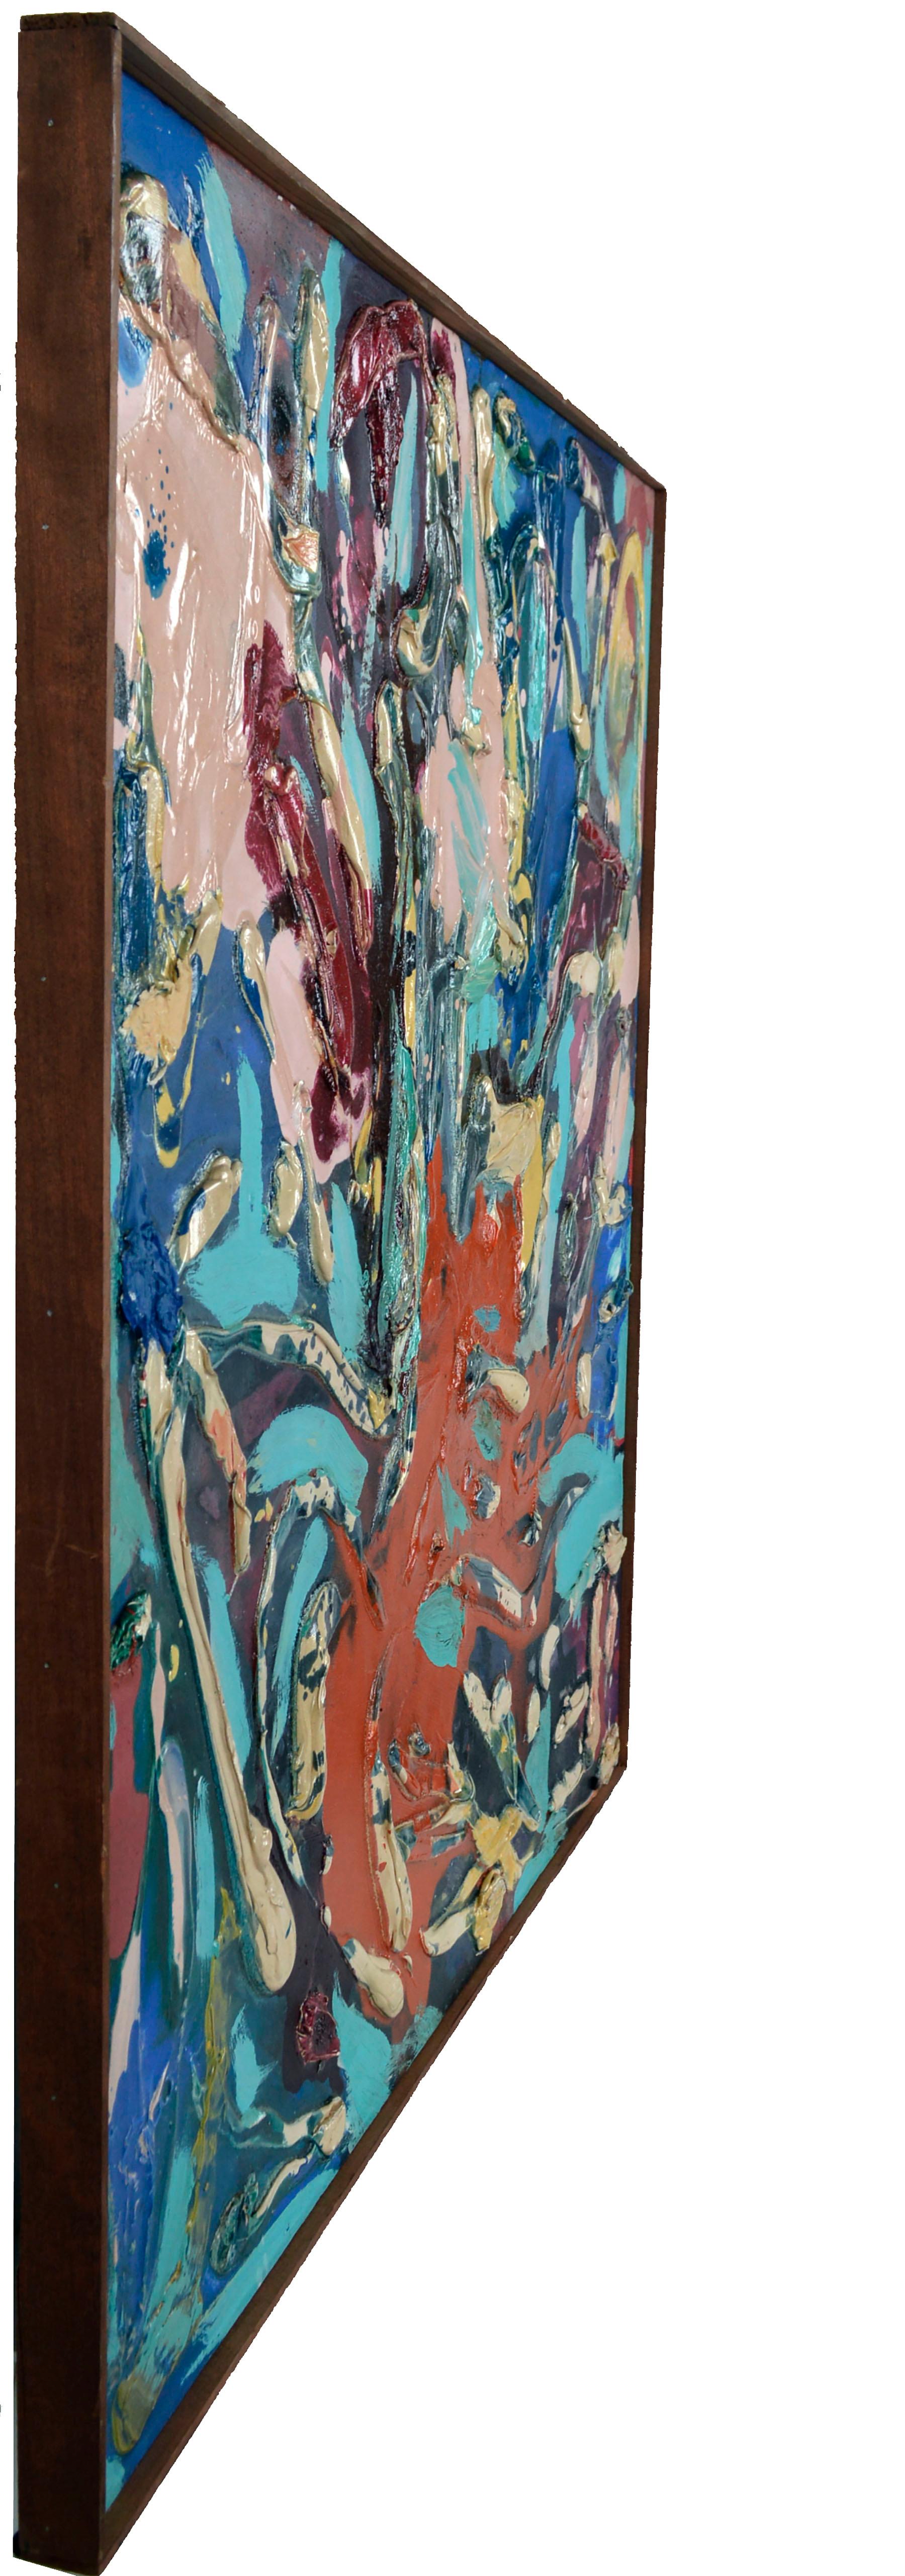 Multi-Color Abstract Expressionist Textural Mid-Century Abstract by Peter Witwer 5